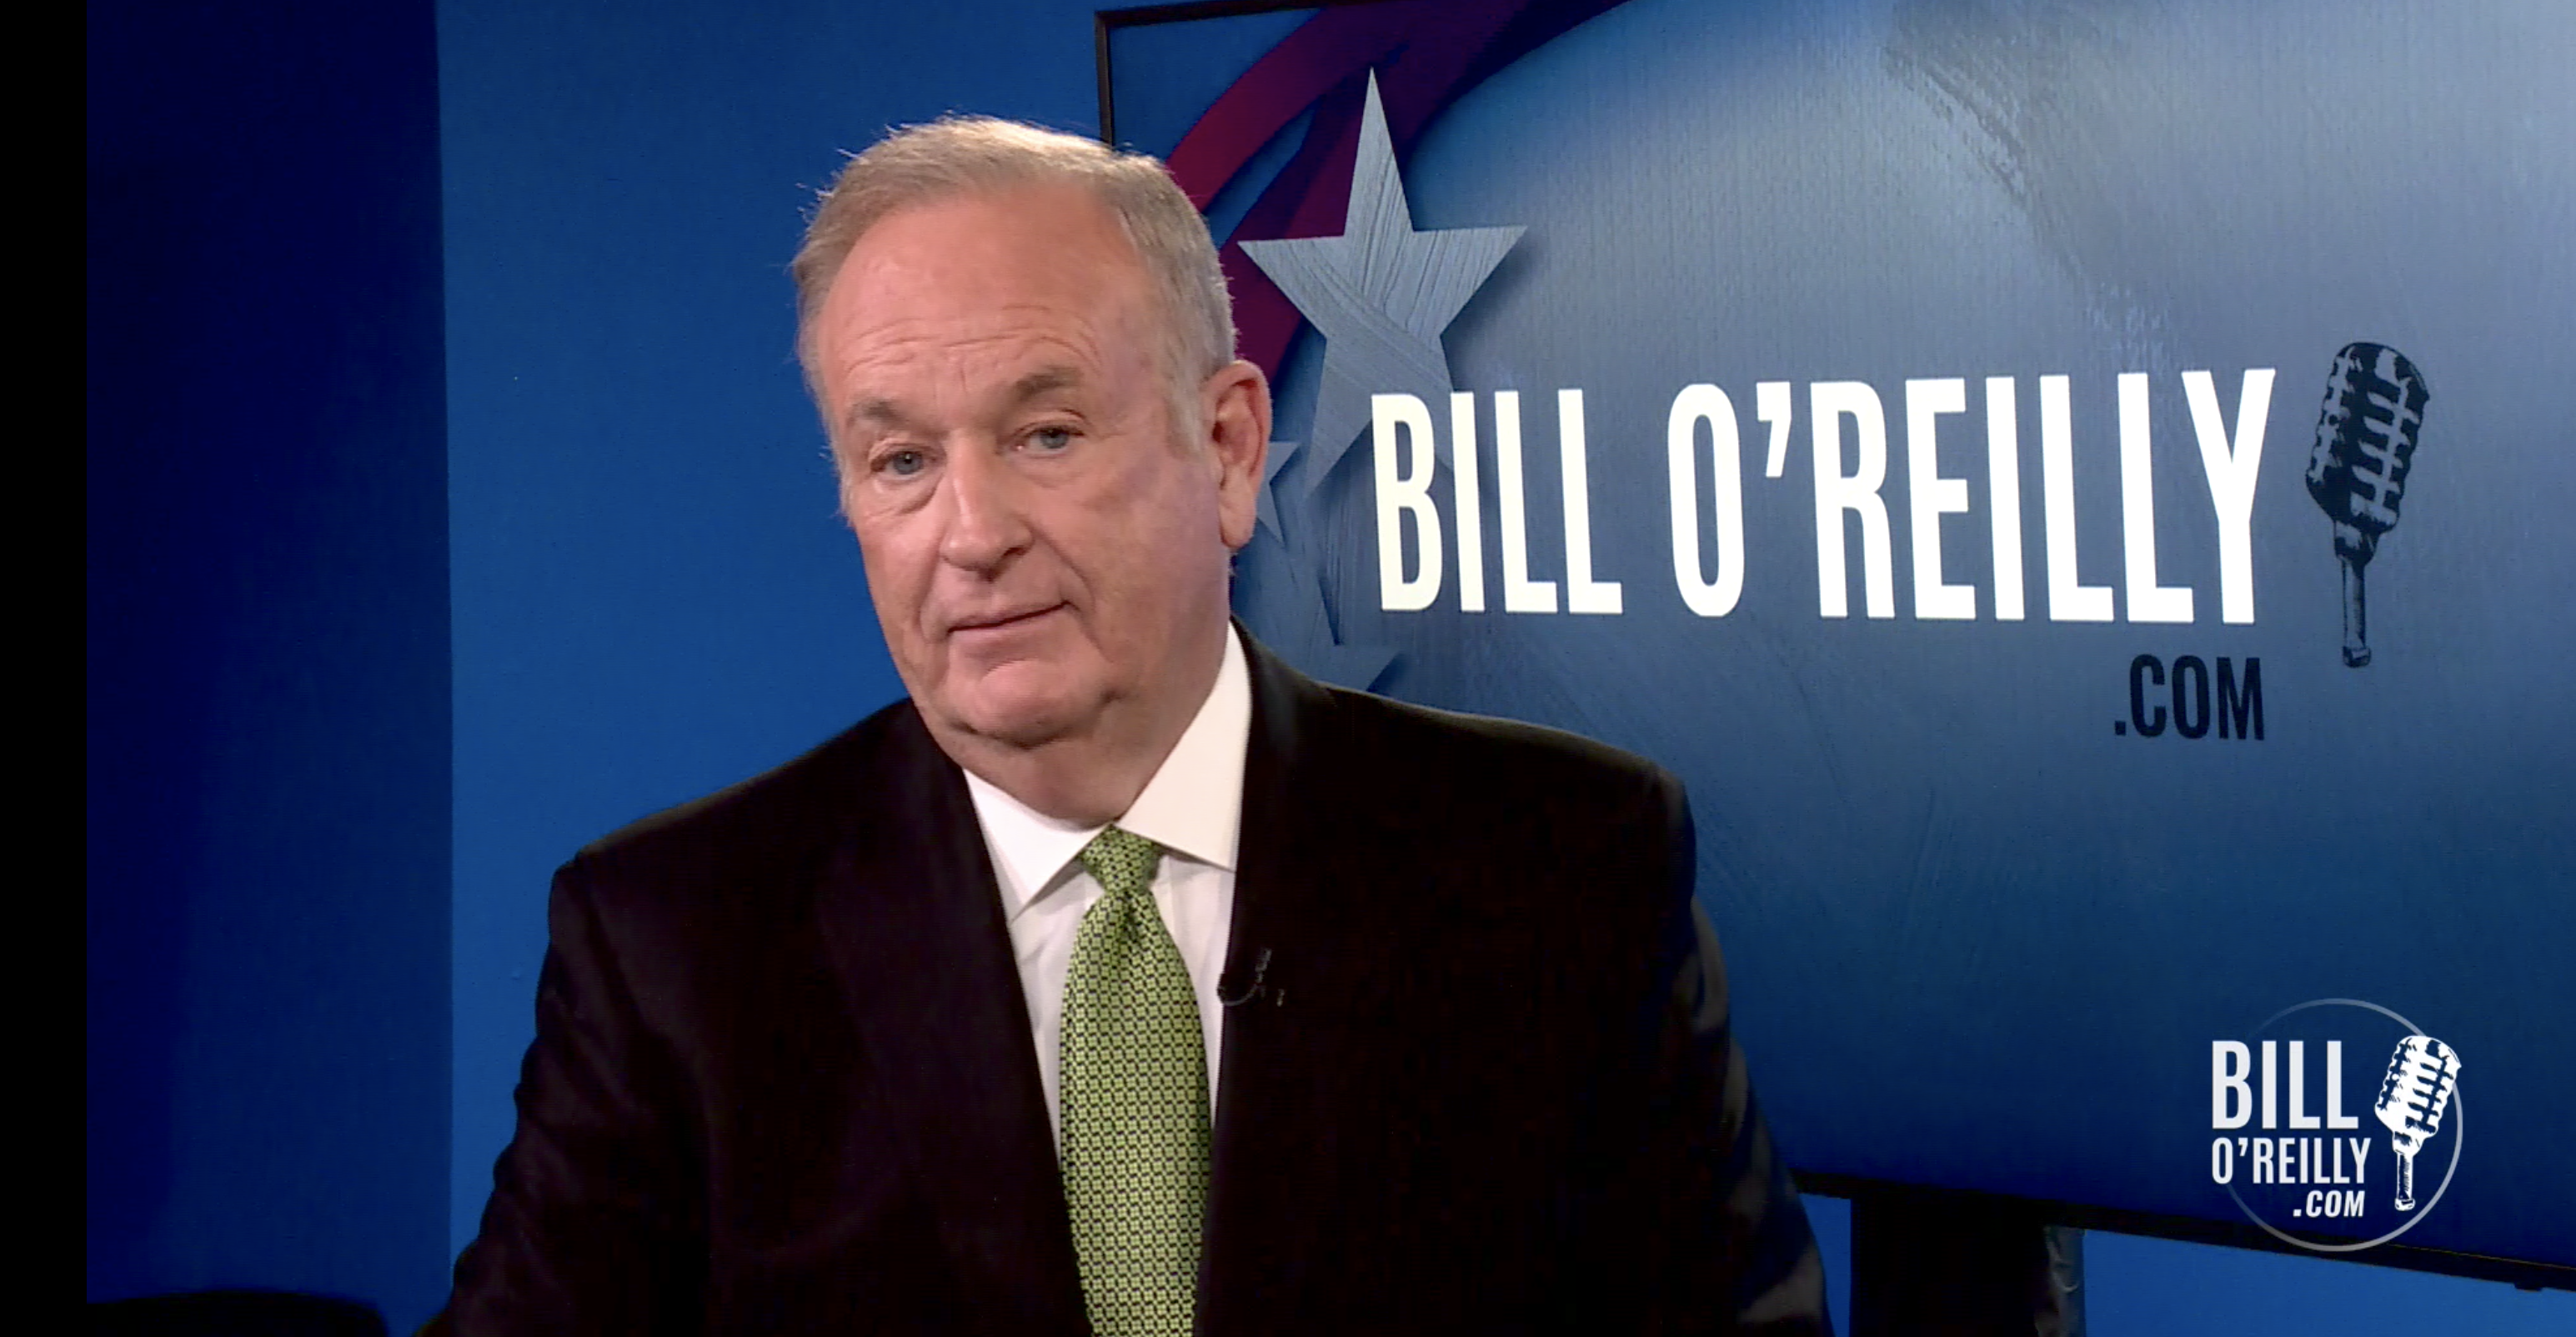 Bill O'Reilly's Town Hall: Bill Talks Media Matters, If He Were President, and How You Can Take Your Country Back